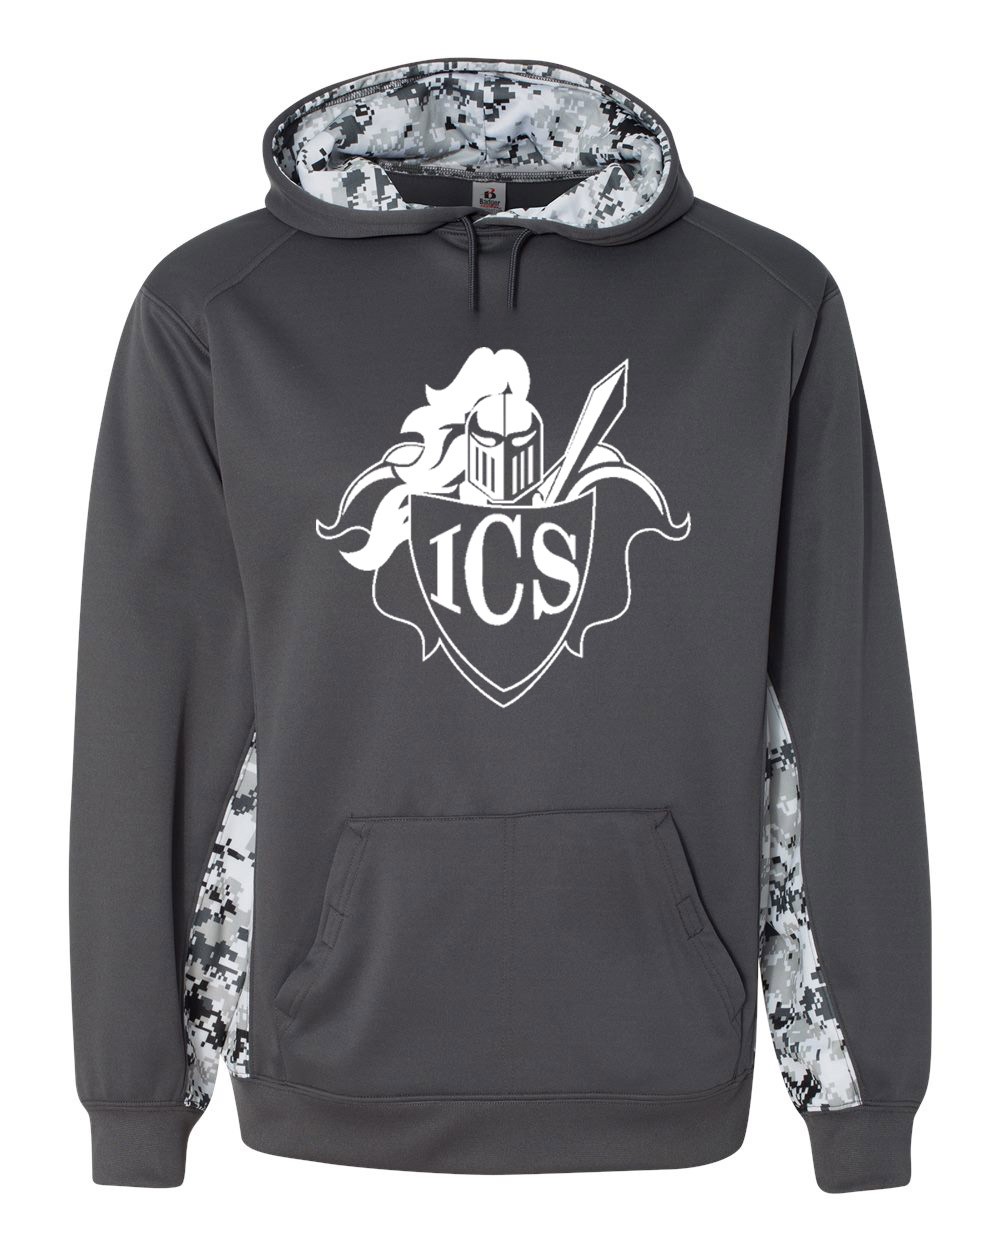 ICS Spirit Digital Color Block Hoodie w/ White Logo - Please Allow 2-3 Weeks for Delivery